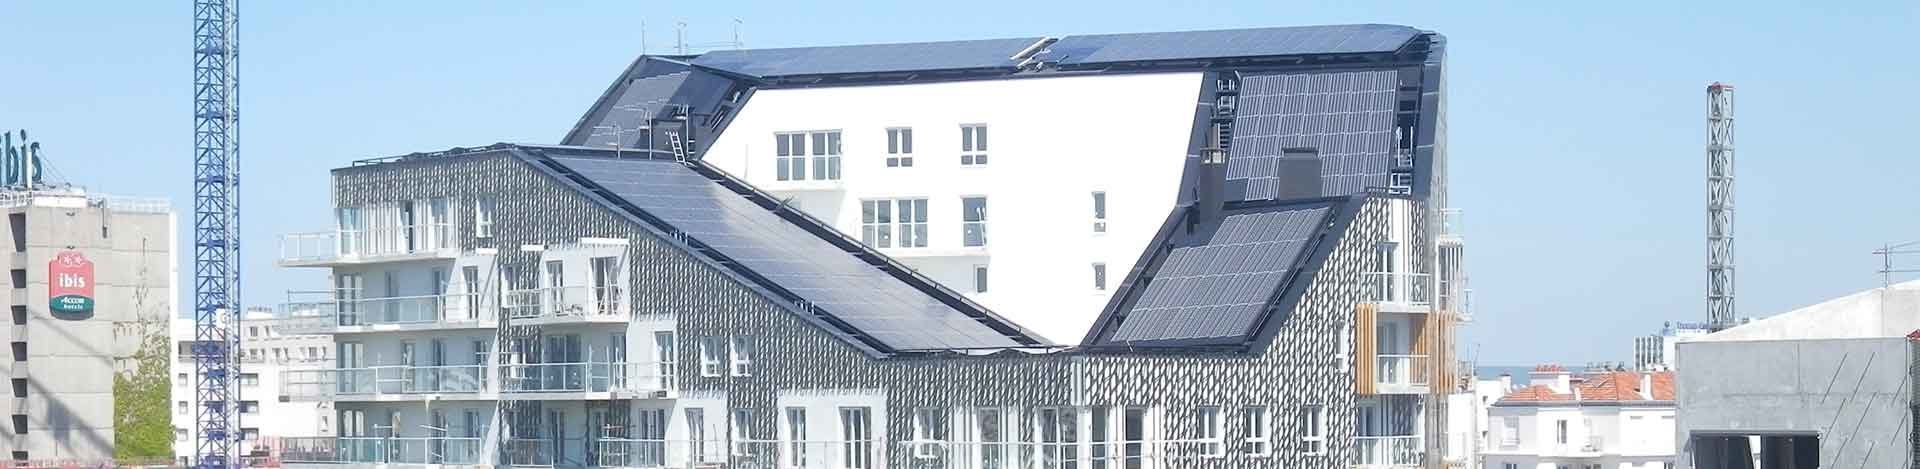 Photovoltaic stations on the roofs